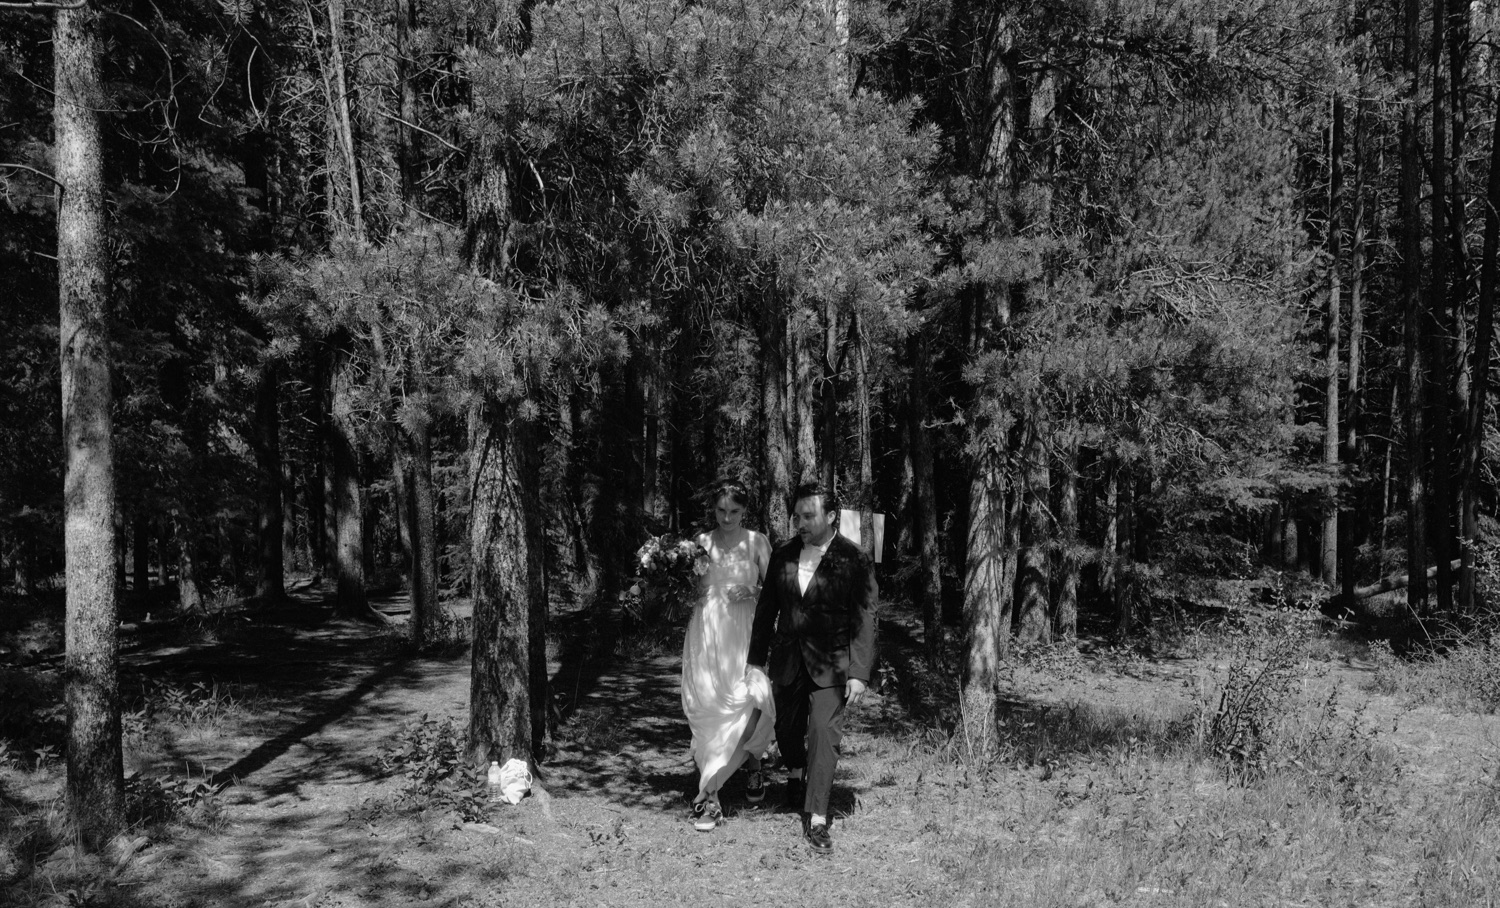 Wedding couple walking themselves down the aisle to their wedding ceremony, exiting a dappled forest